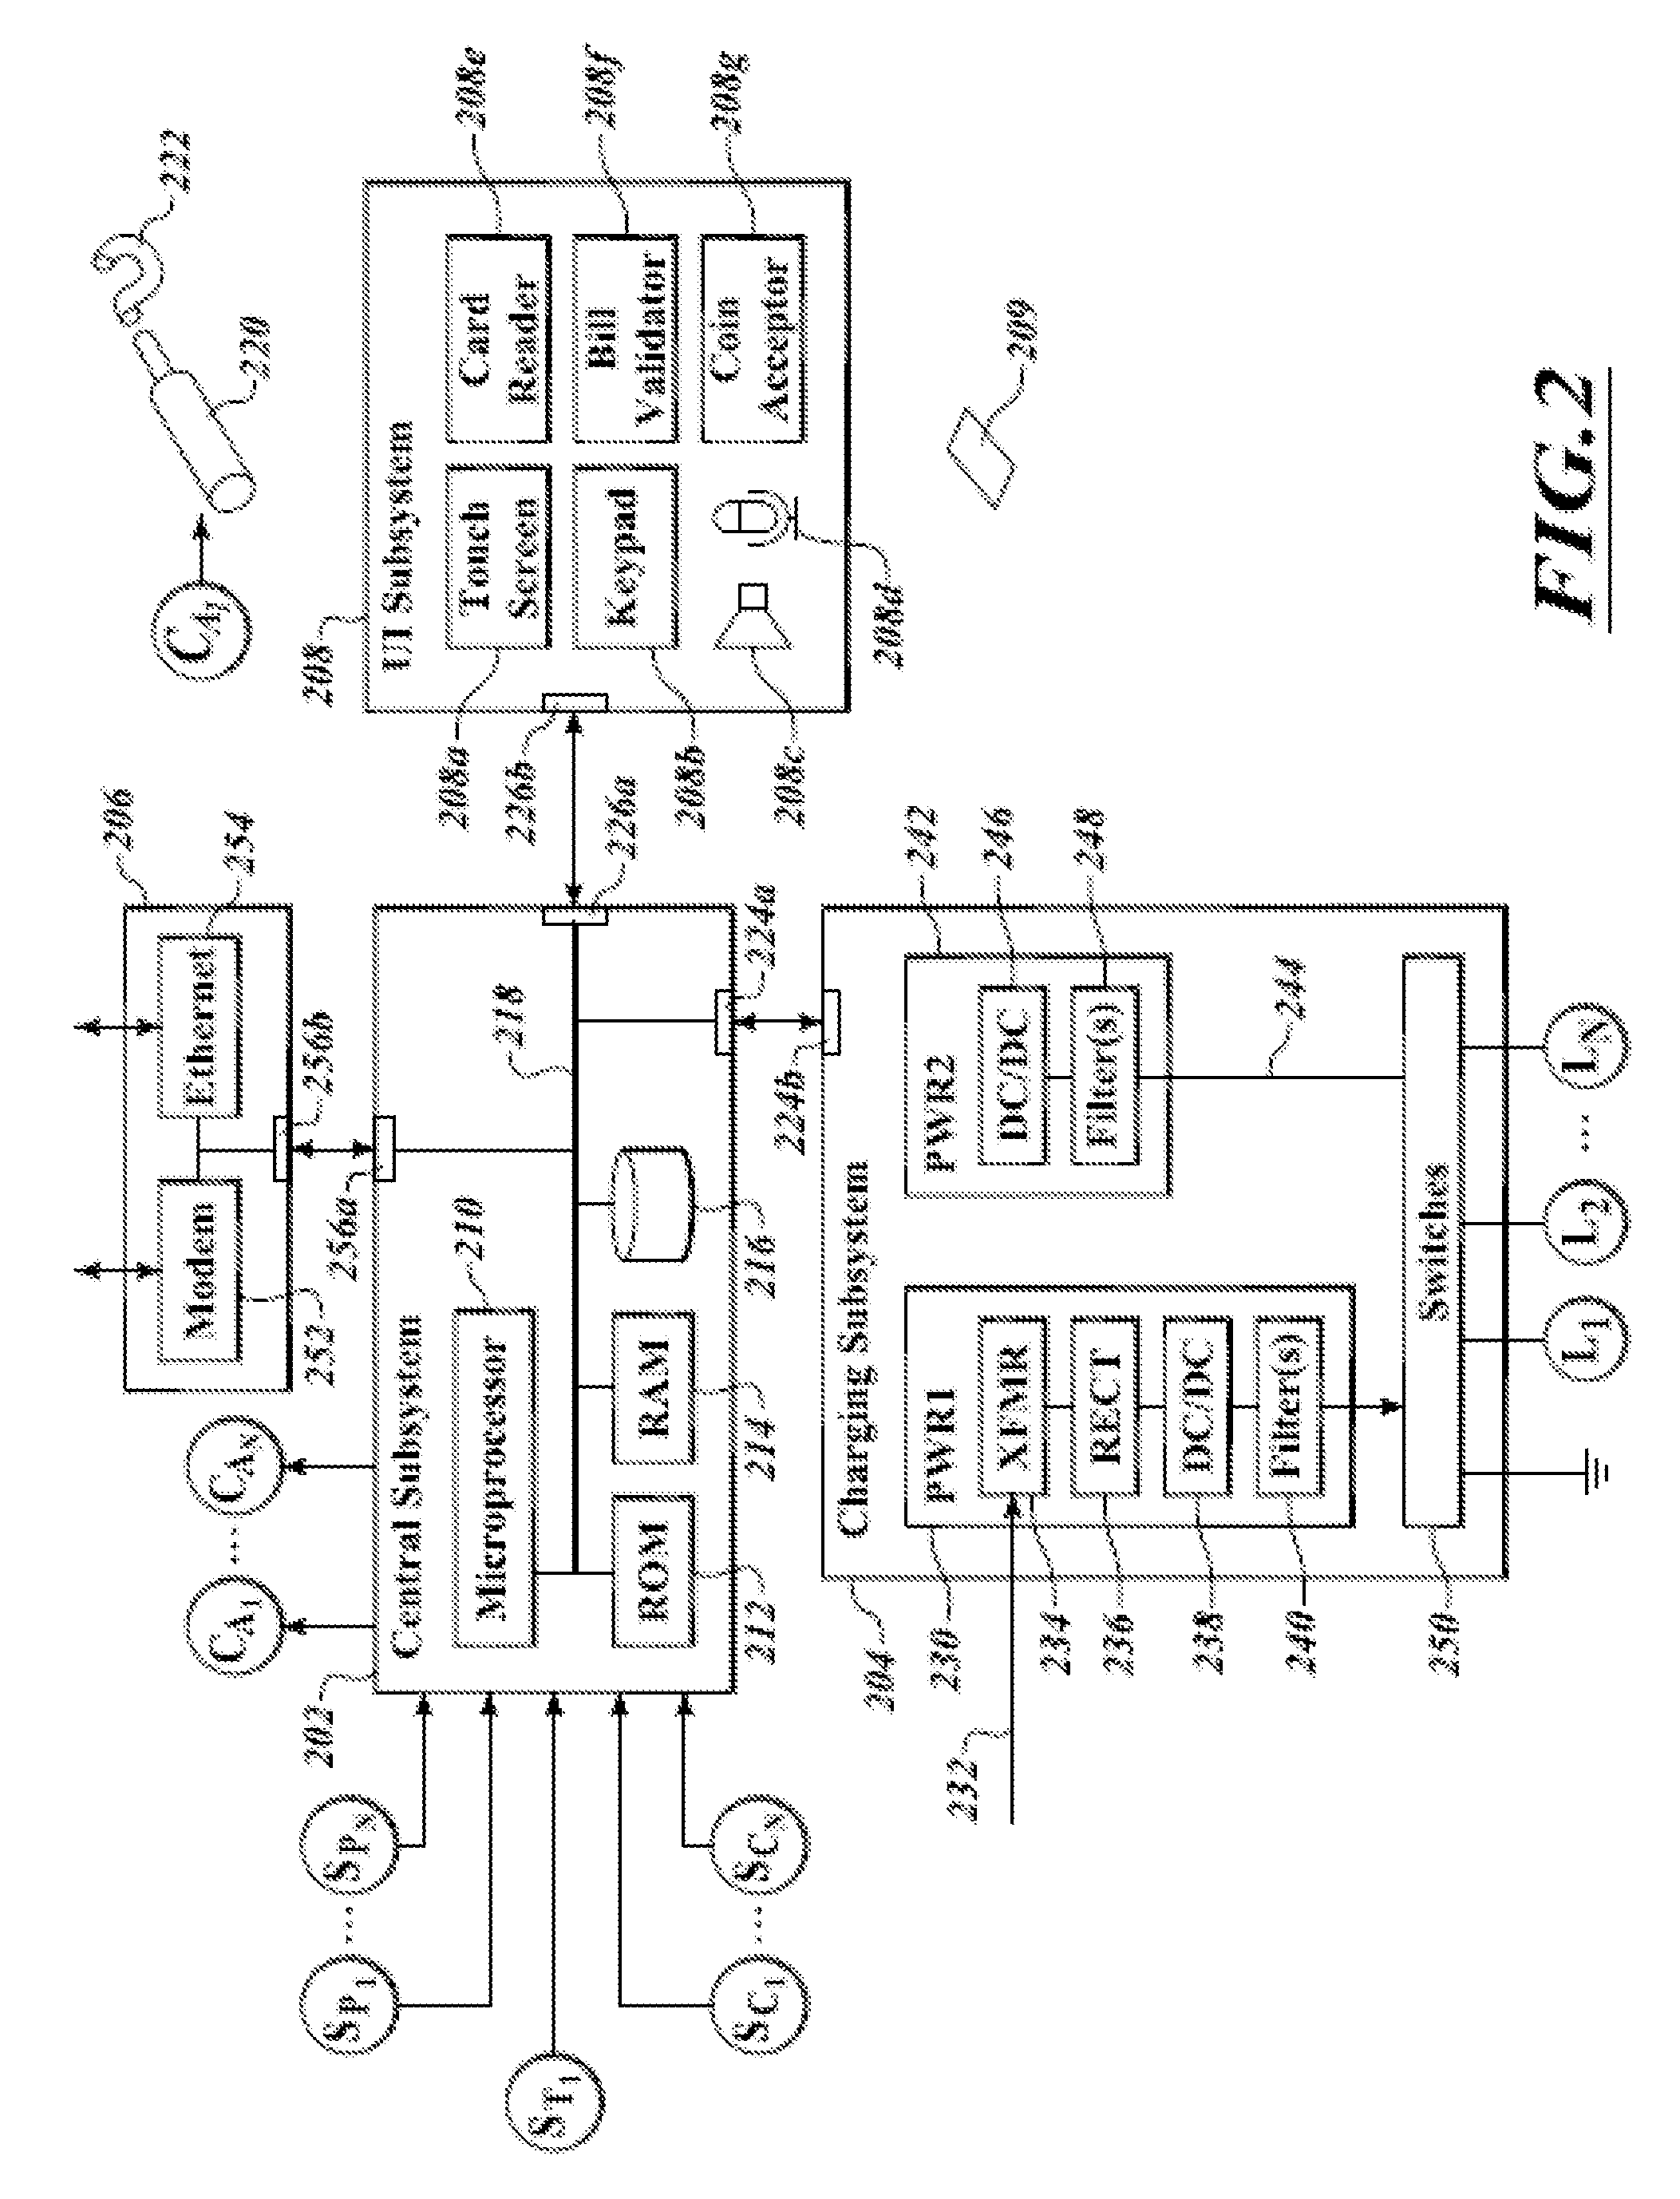 Apparatus, method and article for reserving power storage devices at reserving power storage device collection, charging and distribution machines